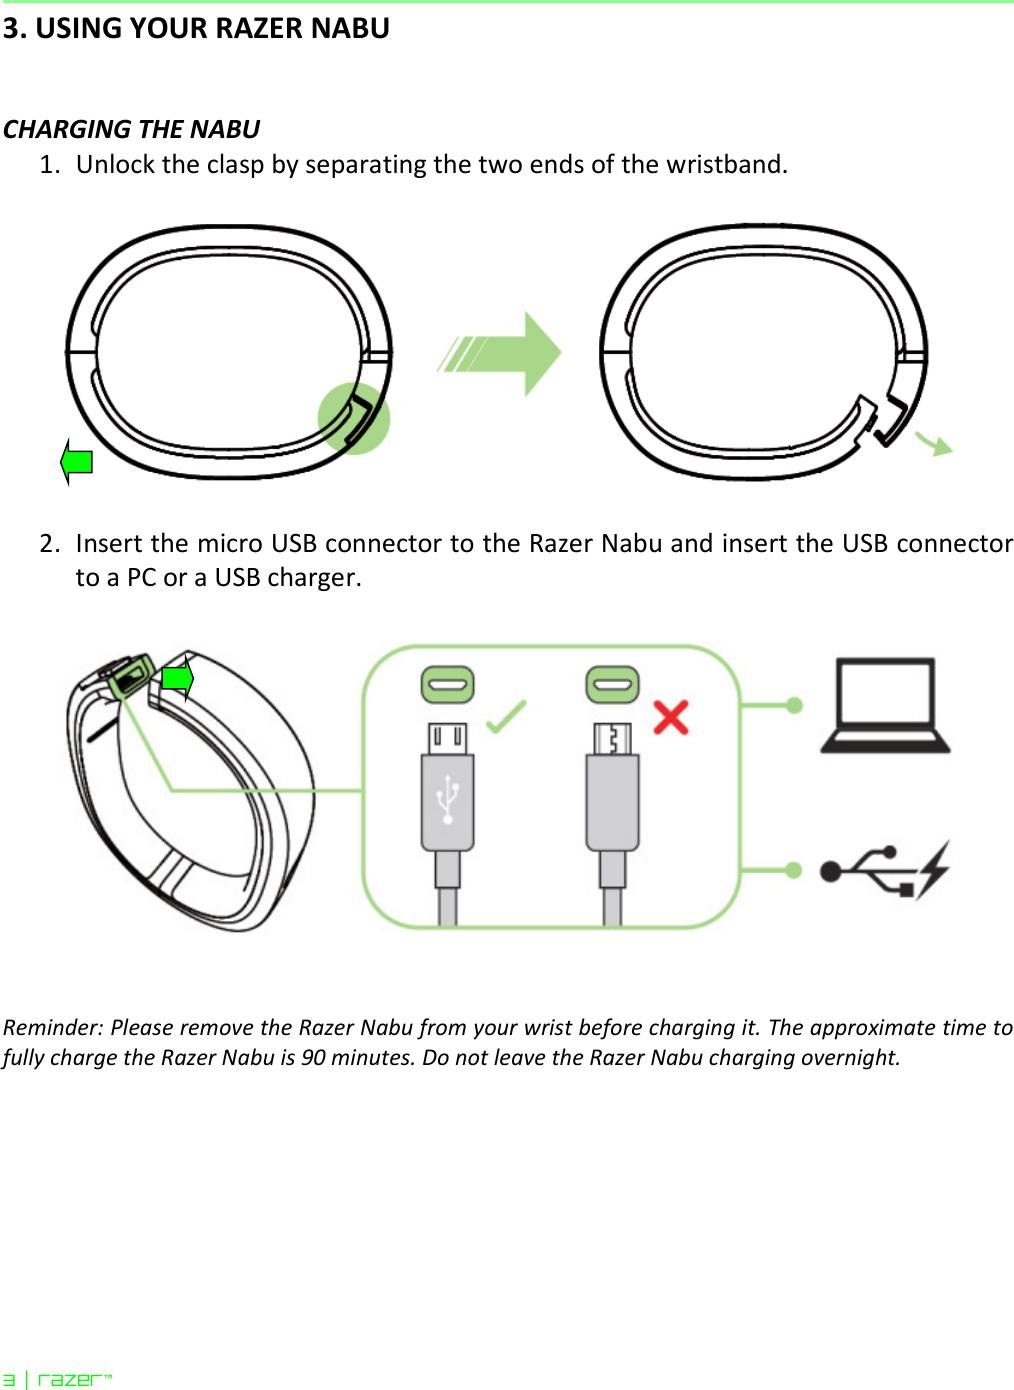  3 | razer™  3. USING YOUR RAZER NABU   CHARGING THE NABU 1. Unlock the clasp by separating the two ends of the wristband.    2. Insert the micro USB connector to the Razer Nabu and insert the USB connector to a PC or a USB charger.      Reminder: Please remove the Razer Nabu from your wrist before charging it. The approximate time to fully charge the Razer Nabu is 90 minutes. Do not leave the Razer Nabu charging overnight.     